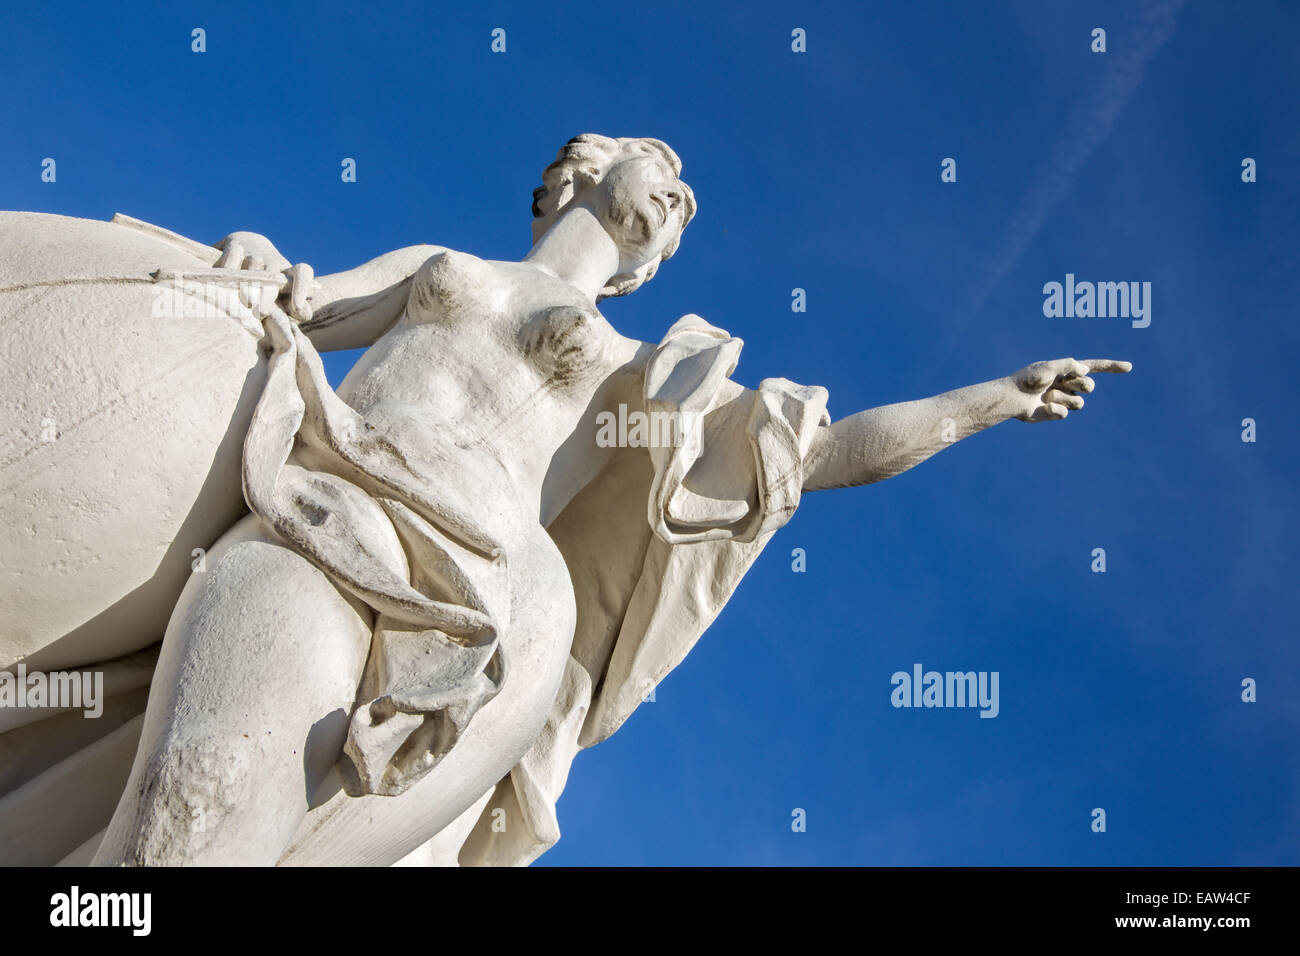 Vienna - The sculpture in the gardens of Belvedere palace. Stock Photo